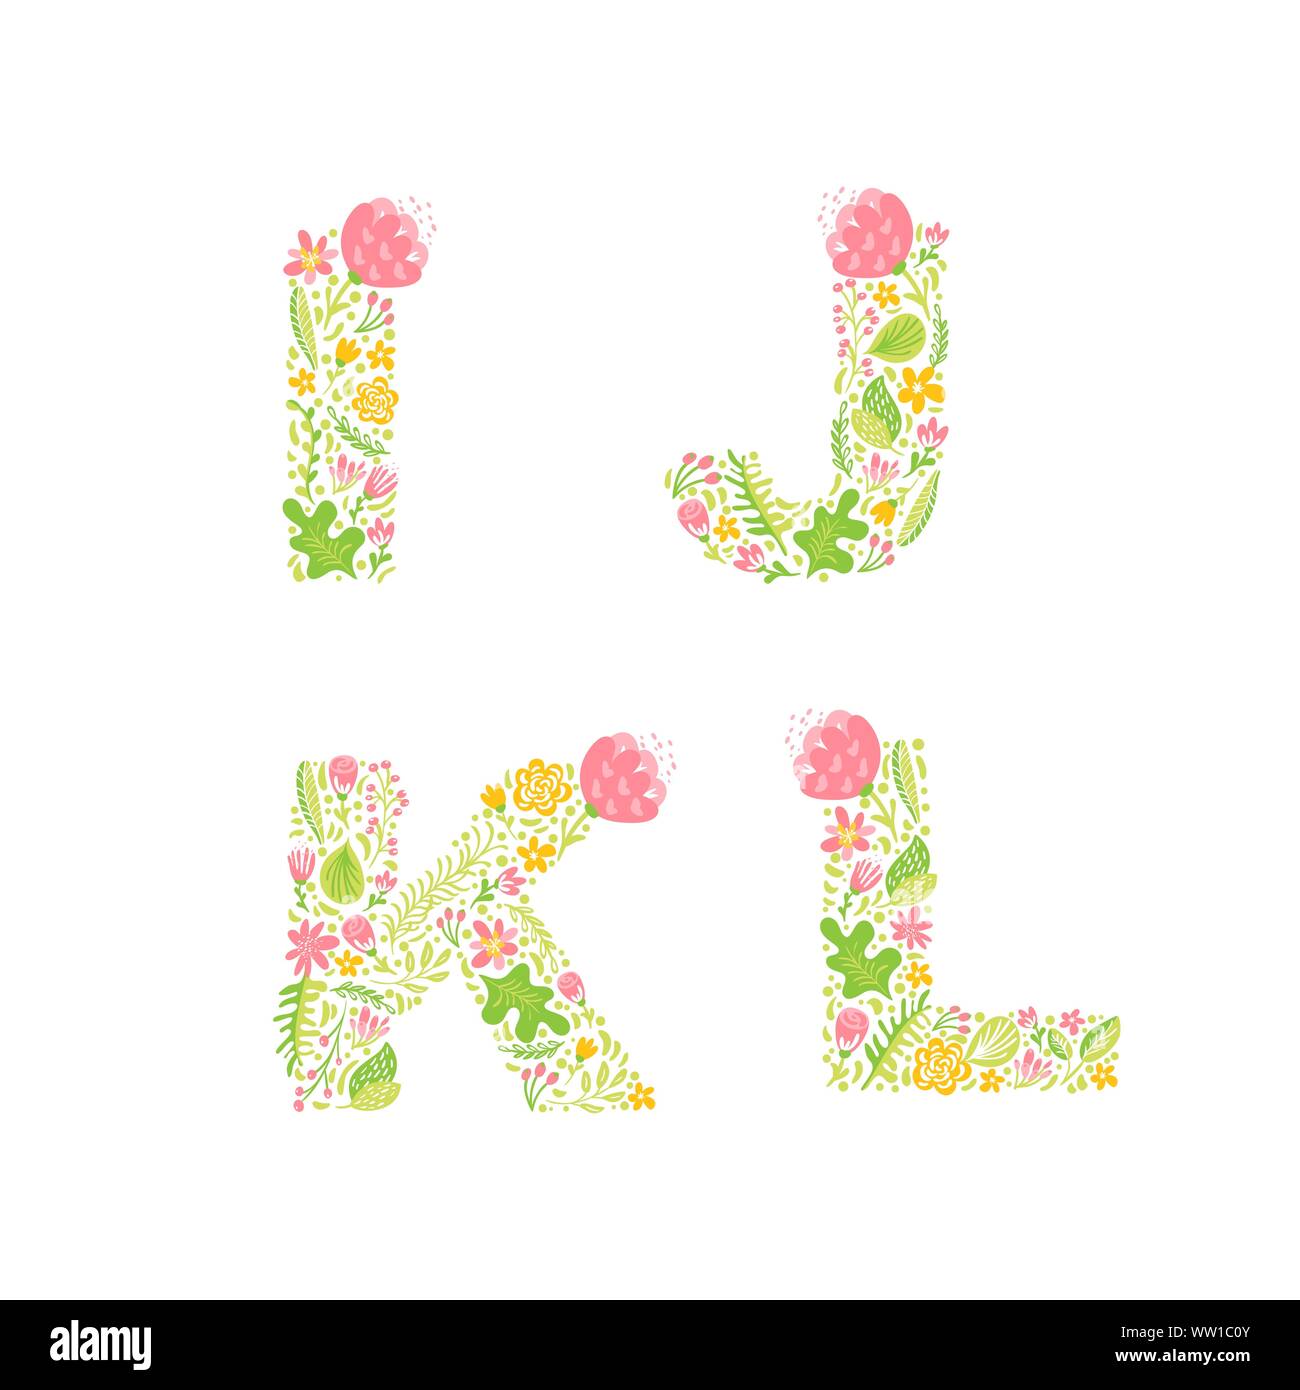 Vector Hand Drawn floral uppercase letter monograms or logo. Uppercase Letters I, J, K, L with Flowers and Branches Blossom. Floral Design Stock Vector